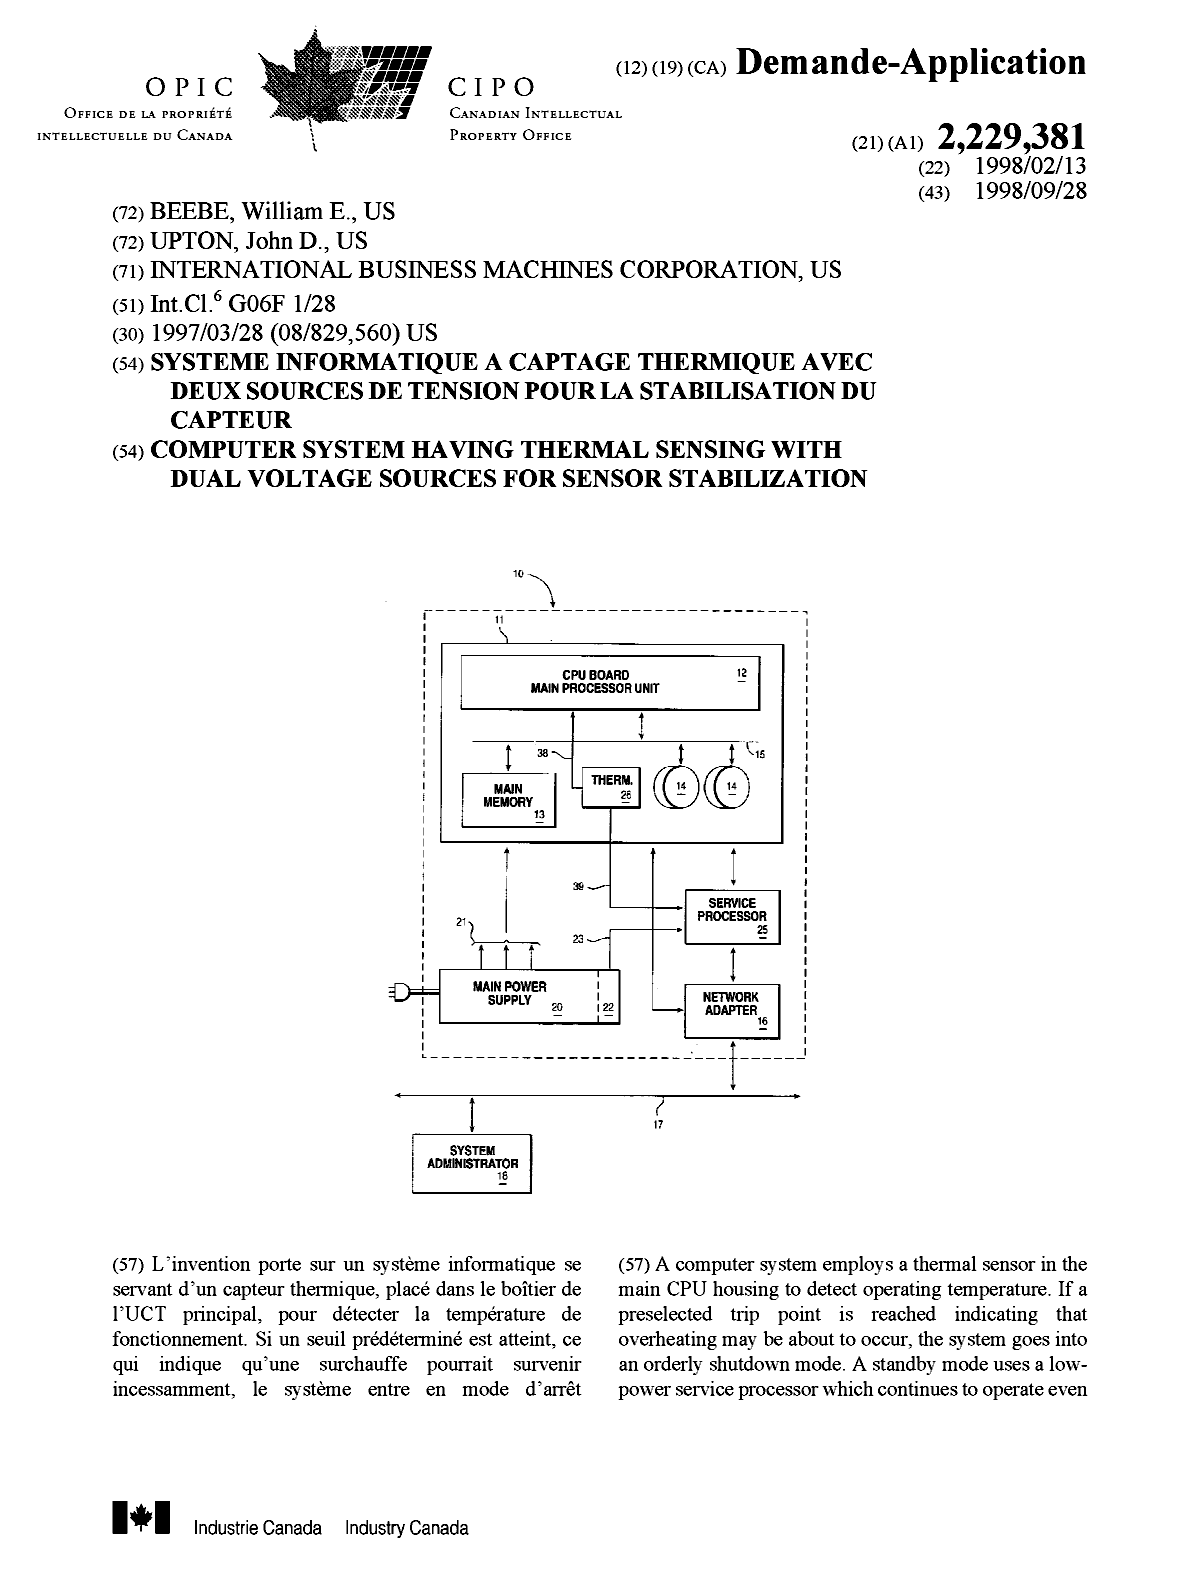 Canadian Patent Document 2229381. Cover Page 19981005. Image 1 of 2